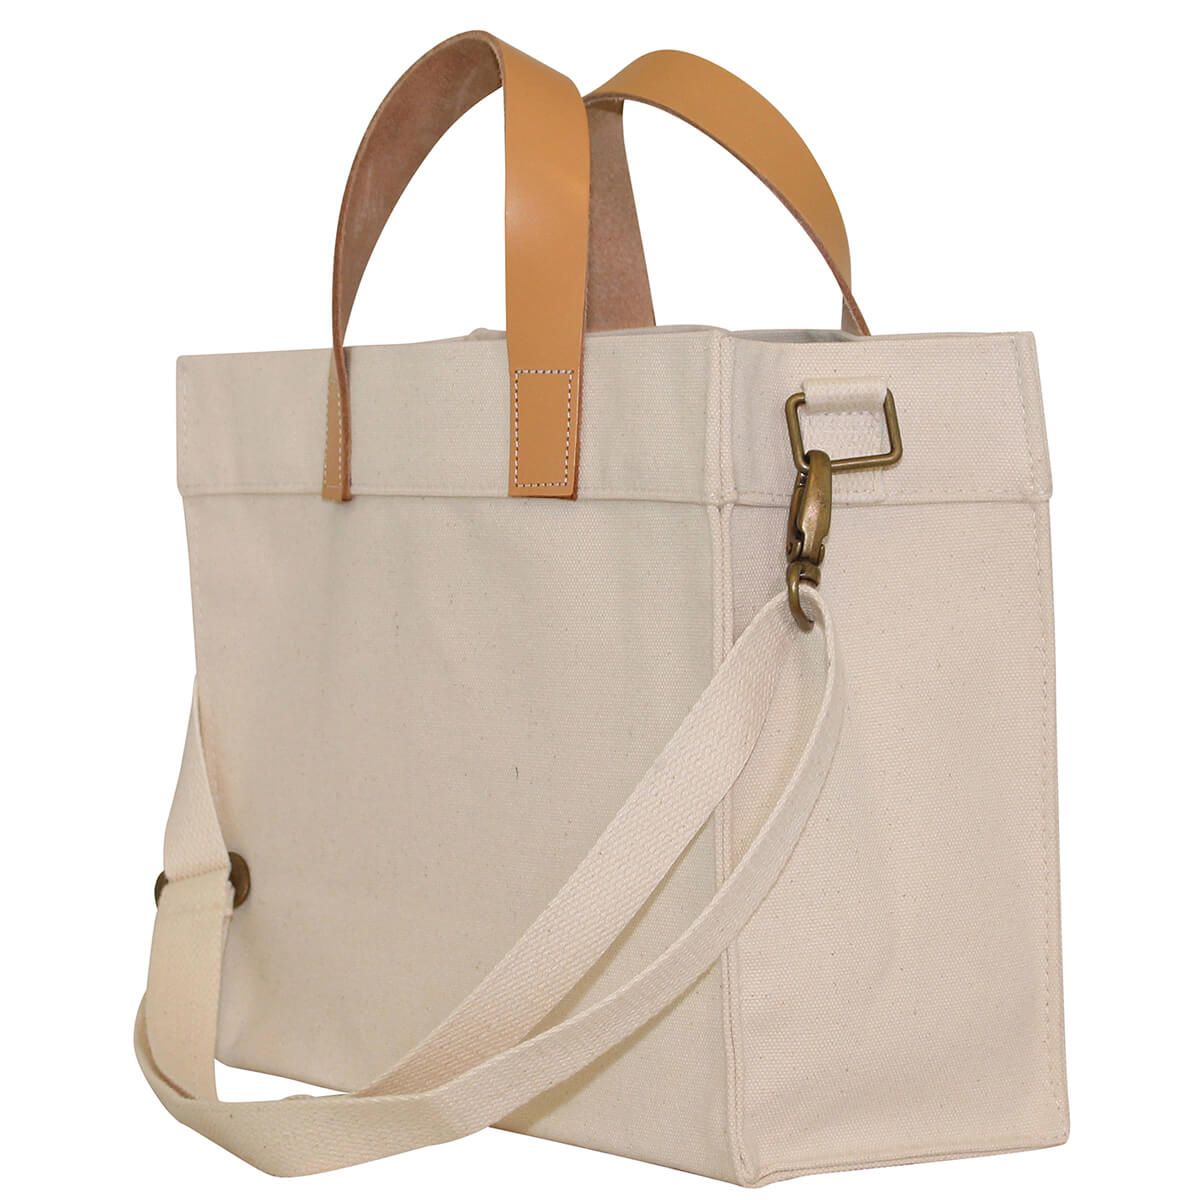 Mini Full-Grain Leather-Trimmed Monogrammed Canvas Tote Bag